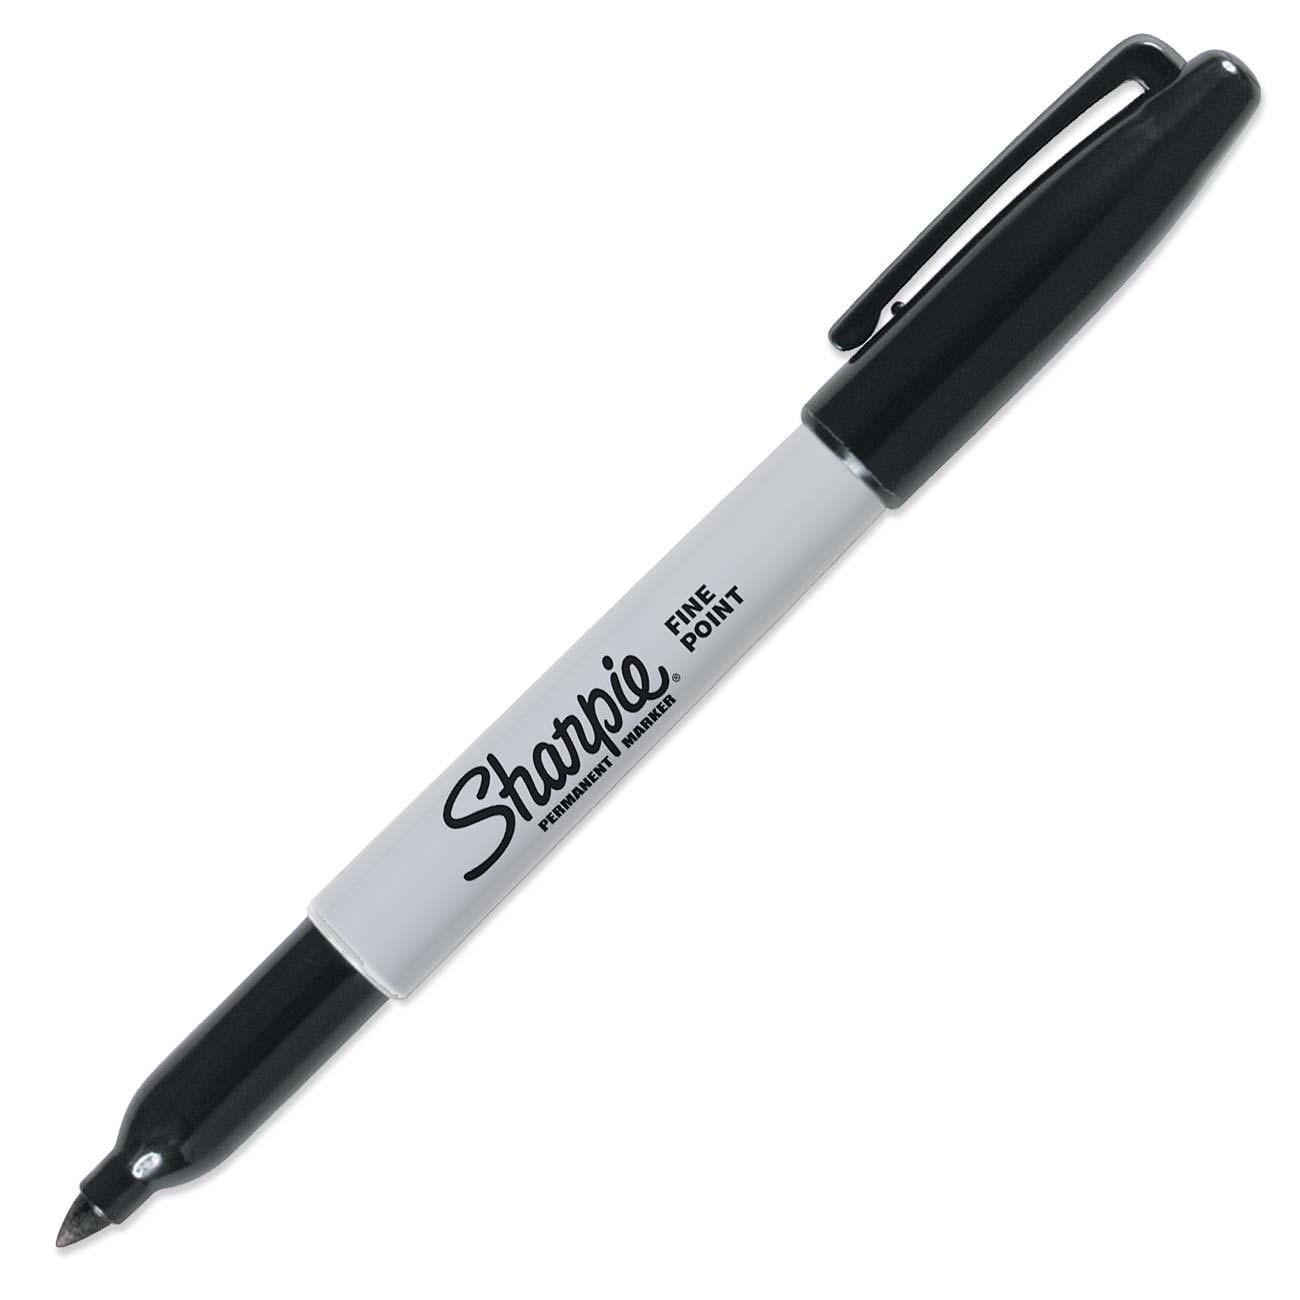 12 Industrial Sharpie Permanent Black Markers Industrial Fine Point  Illustration, Drawing, Blending, Shading, Rendering, Arts, Crafts 